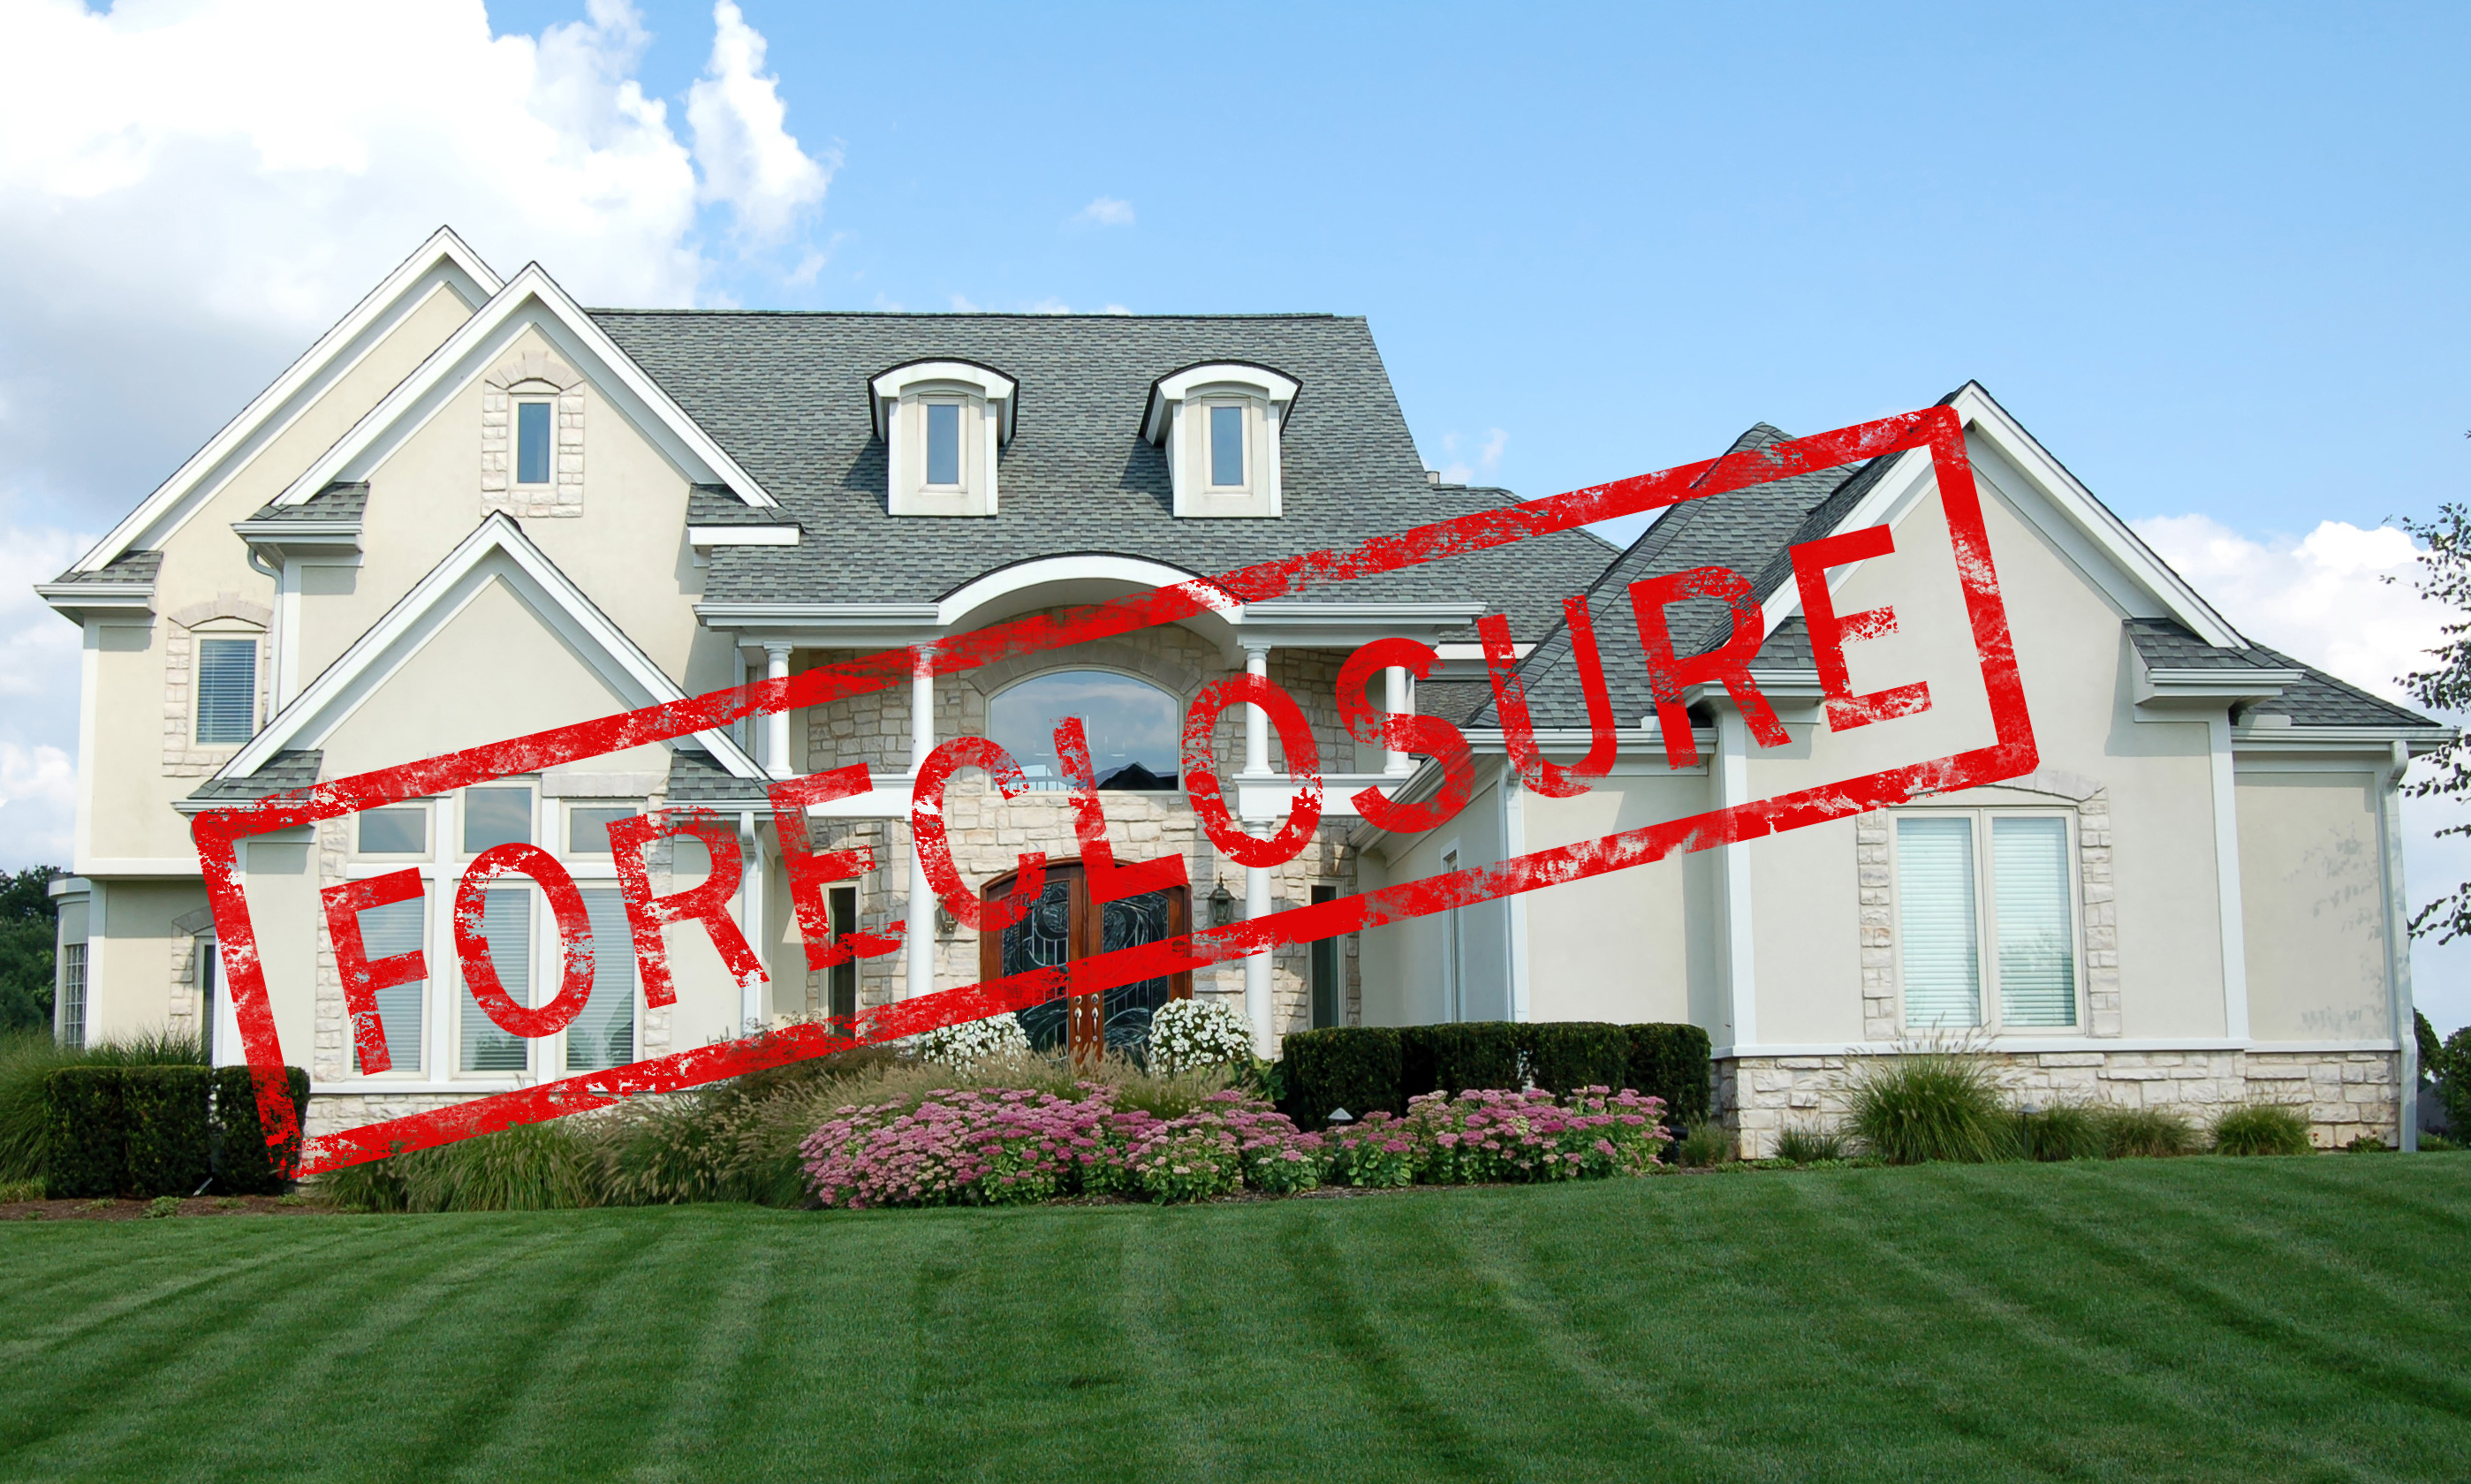 Call Acanda Appraisal Co. to order appraisals of Broward foreclosures